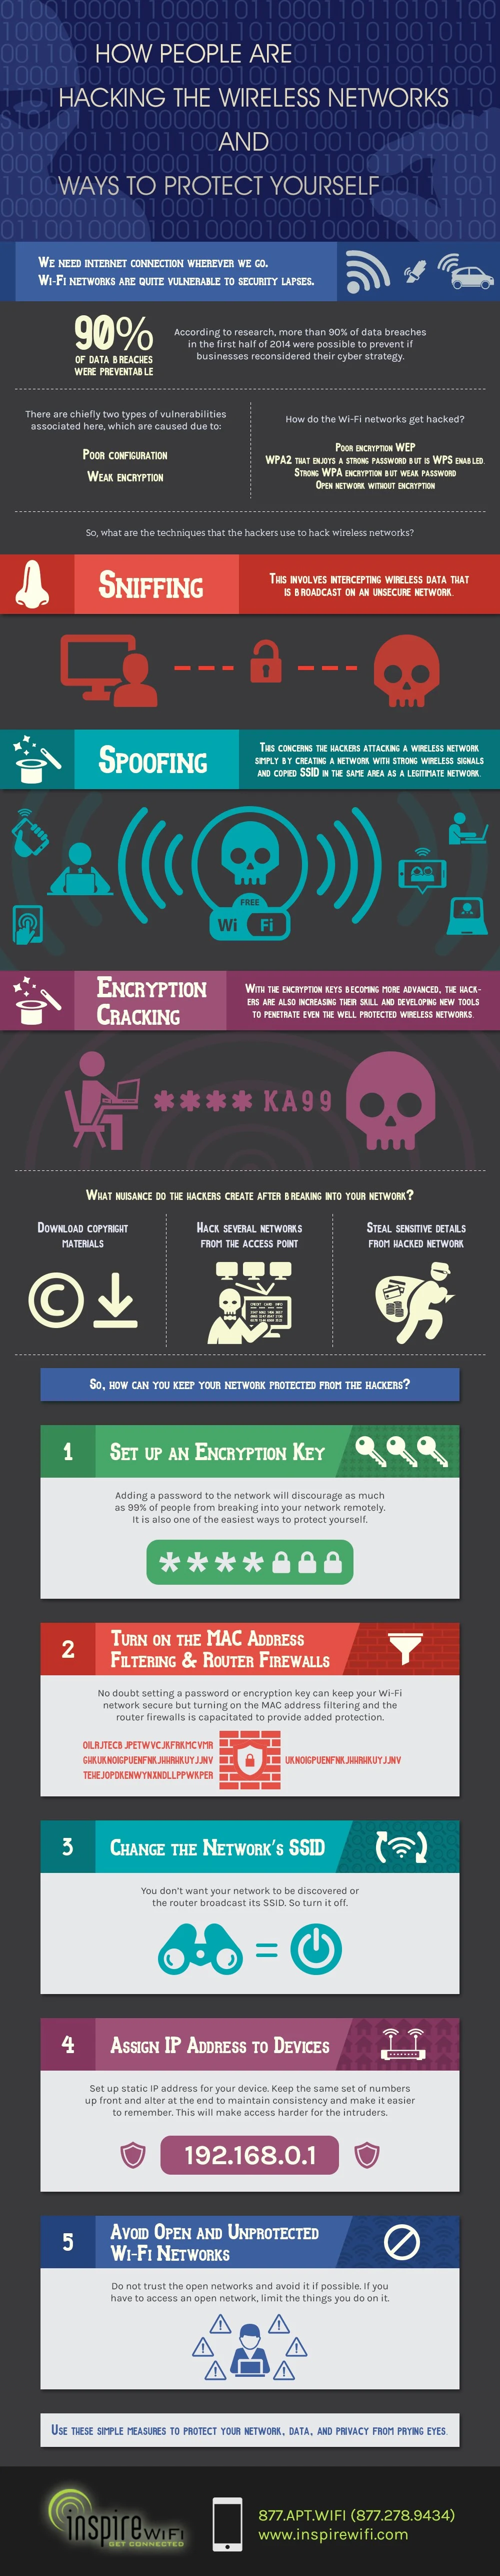 How People are Hacking the Wireless Networks - #infographic